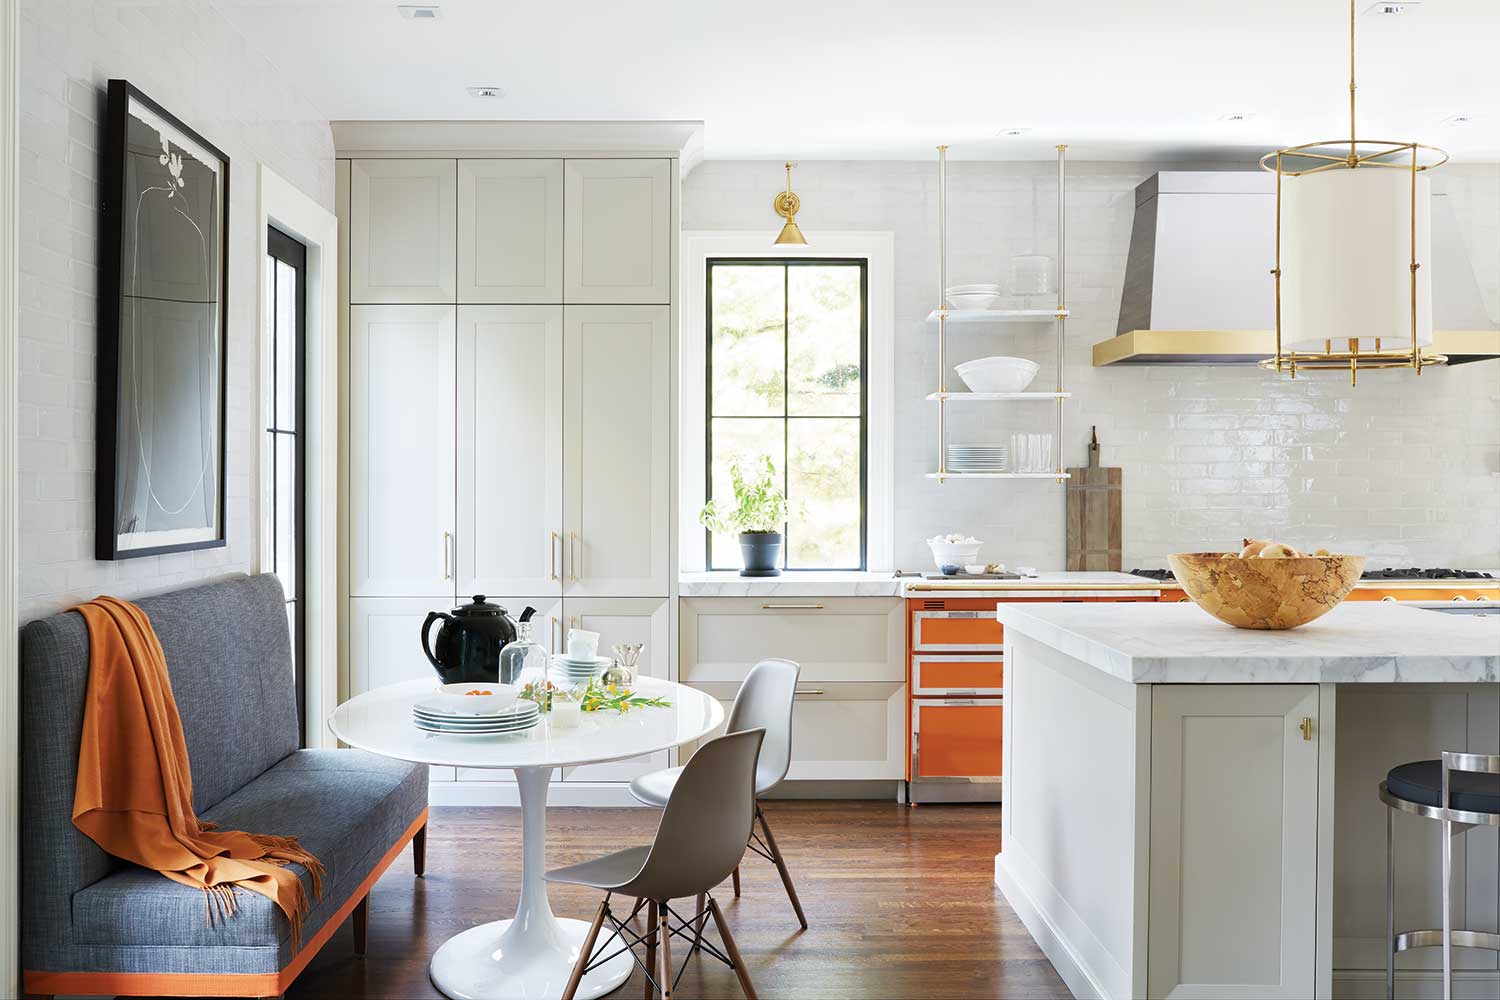 white kitchen with orange range, gold accents, blue banquette, white tulip table and two white chairs